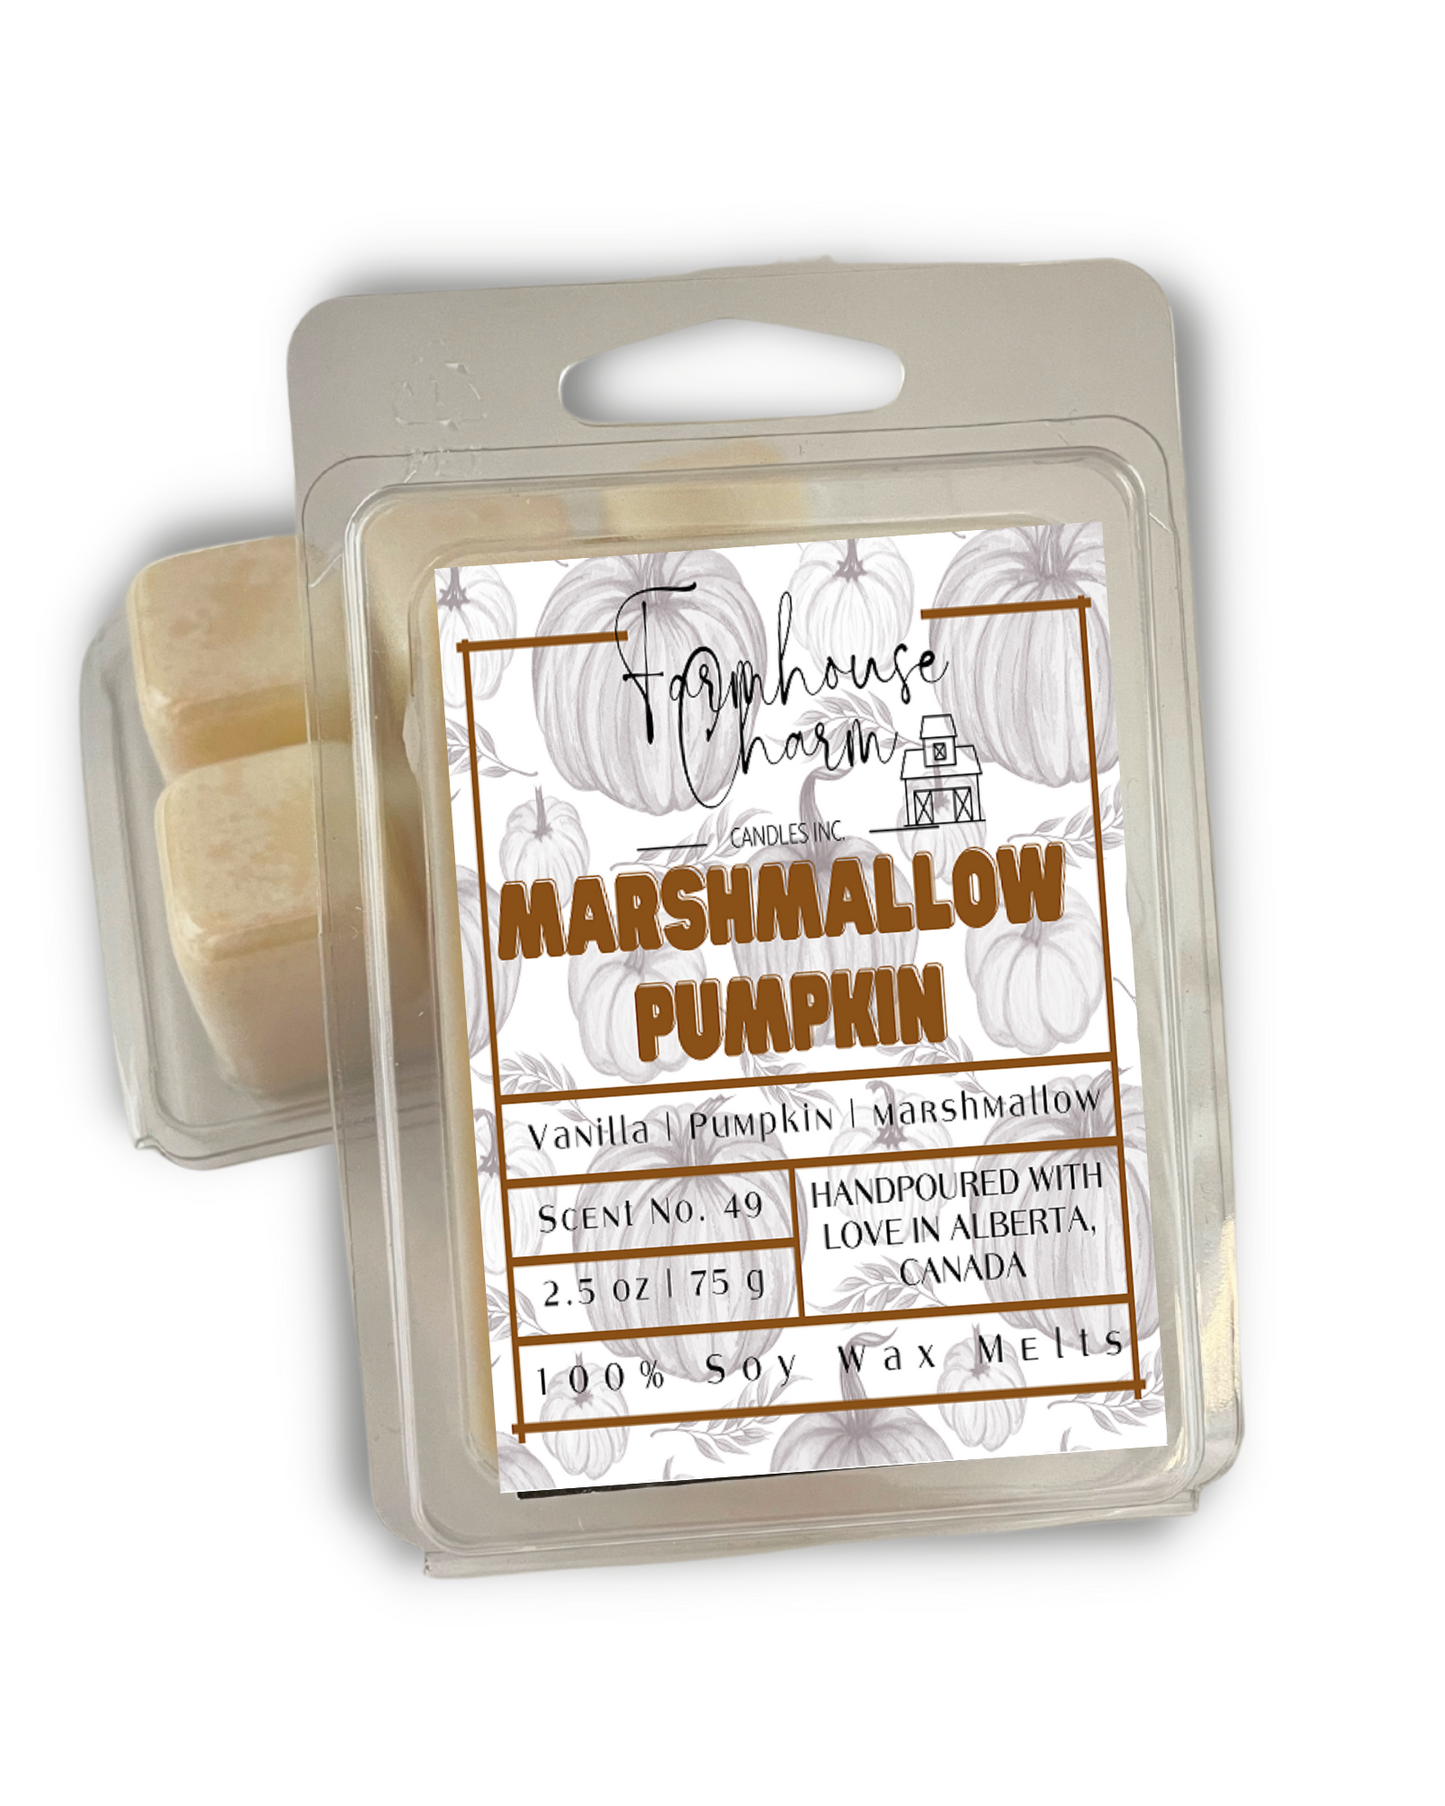 Marshmallow Pumpkin Soy Wax Melts by Farmhouse Charm is a perfect addition to any home. The unique fragrance combines the sweet and comforting scents of vanilla, marshmallow, and pumpkin. The sweet and comforting scent of these candles creates a cozy atmosphere that is perfect for relaxing and unwinding after a long day. 